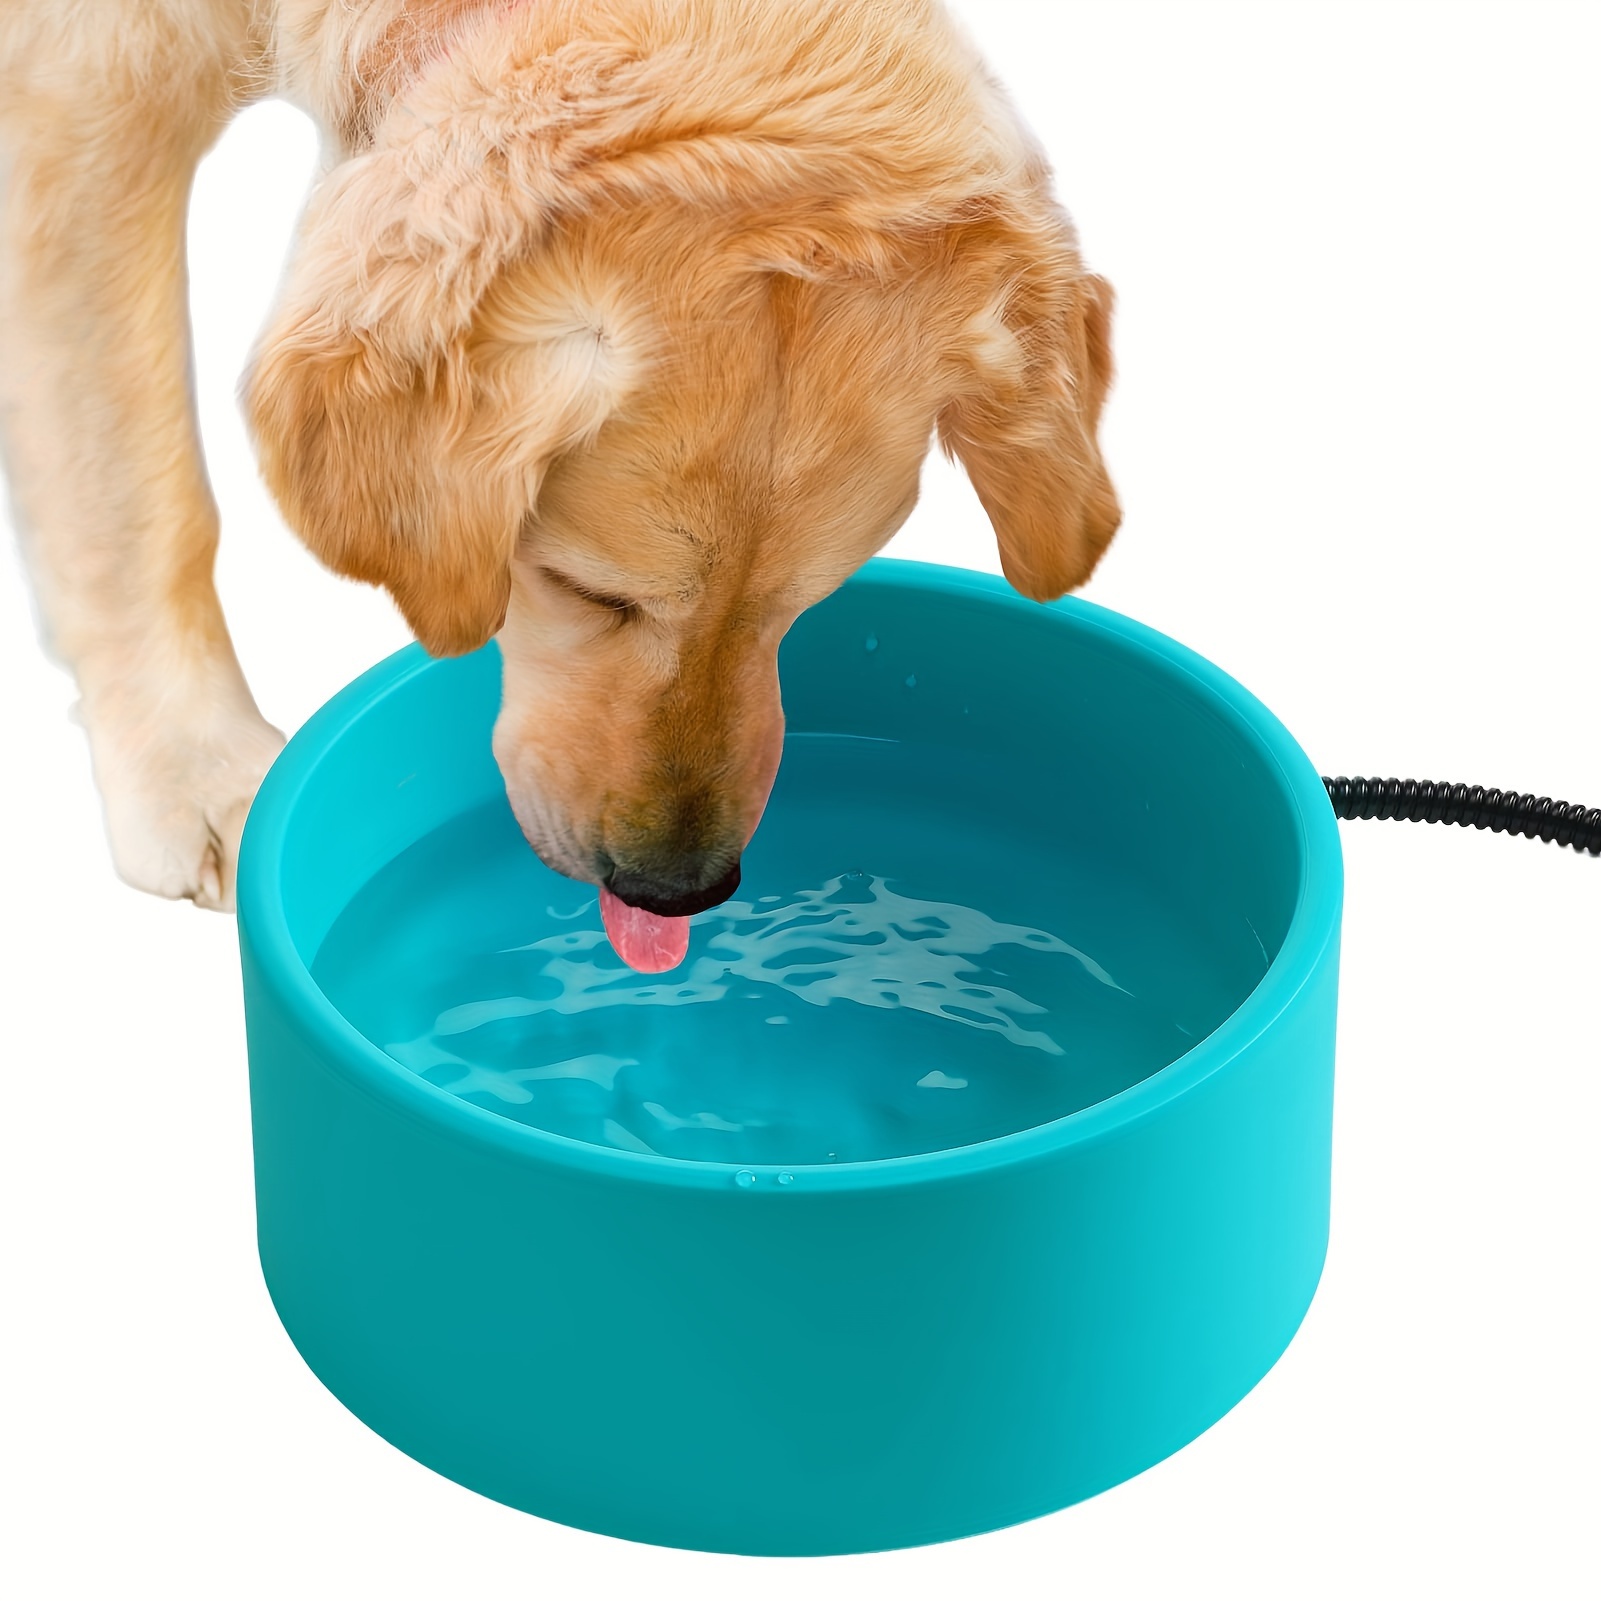 Thermal Stainless Steel Heated Pet Bowl - Essex County Co-Op